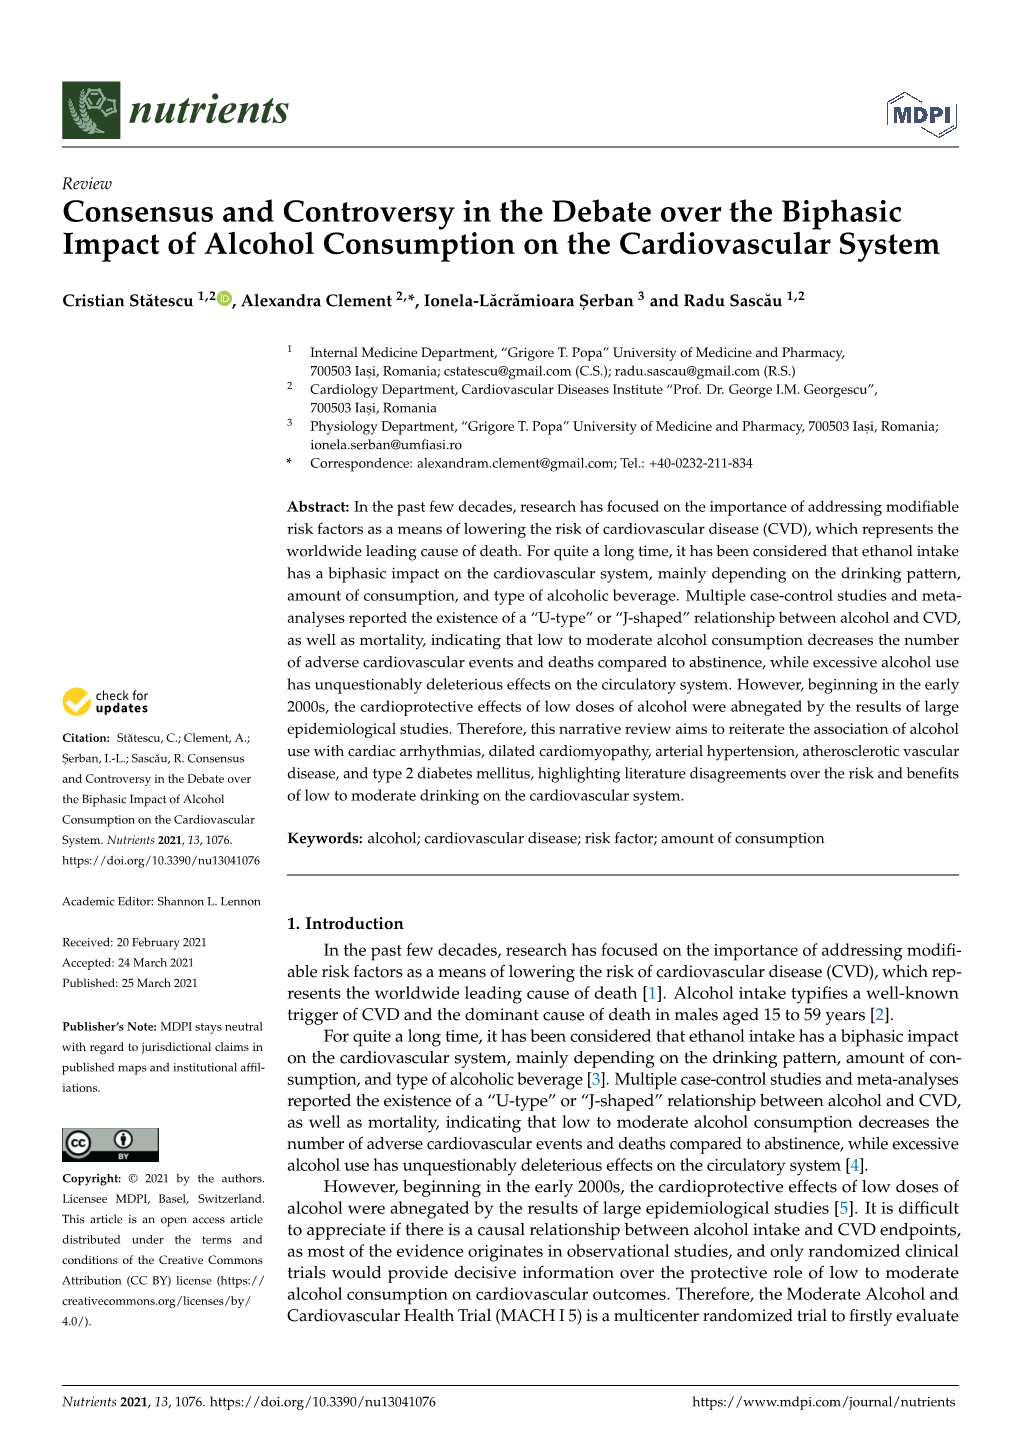 Consensus and Controversy in the Debate Over the Biphasic Impact of Alcohol Consumption on the Cardiovascular System